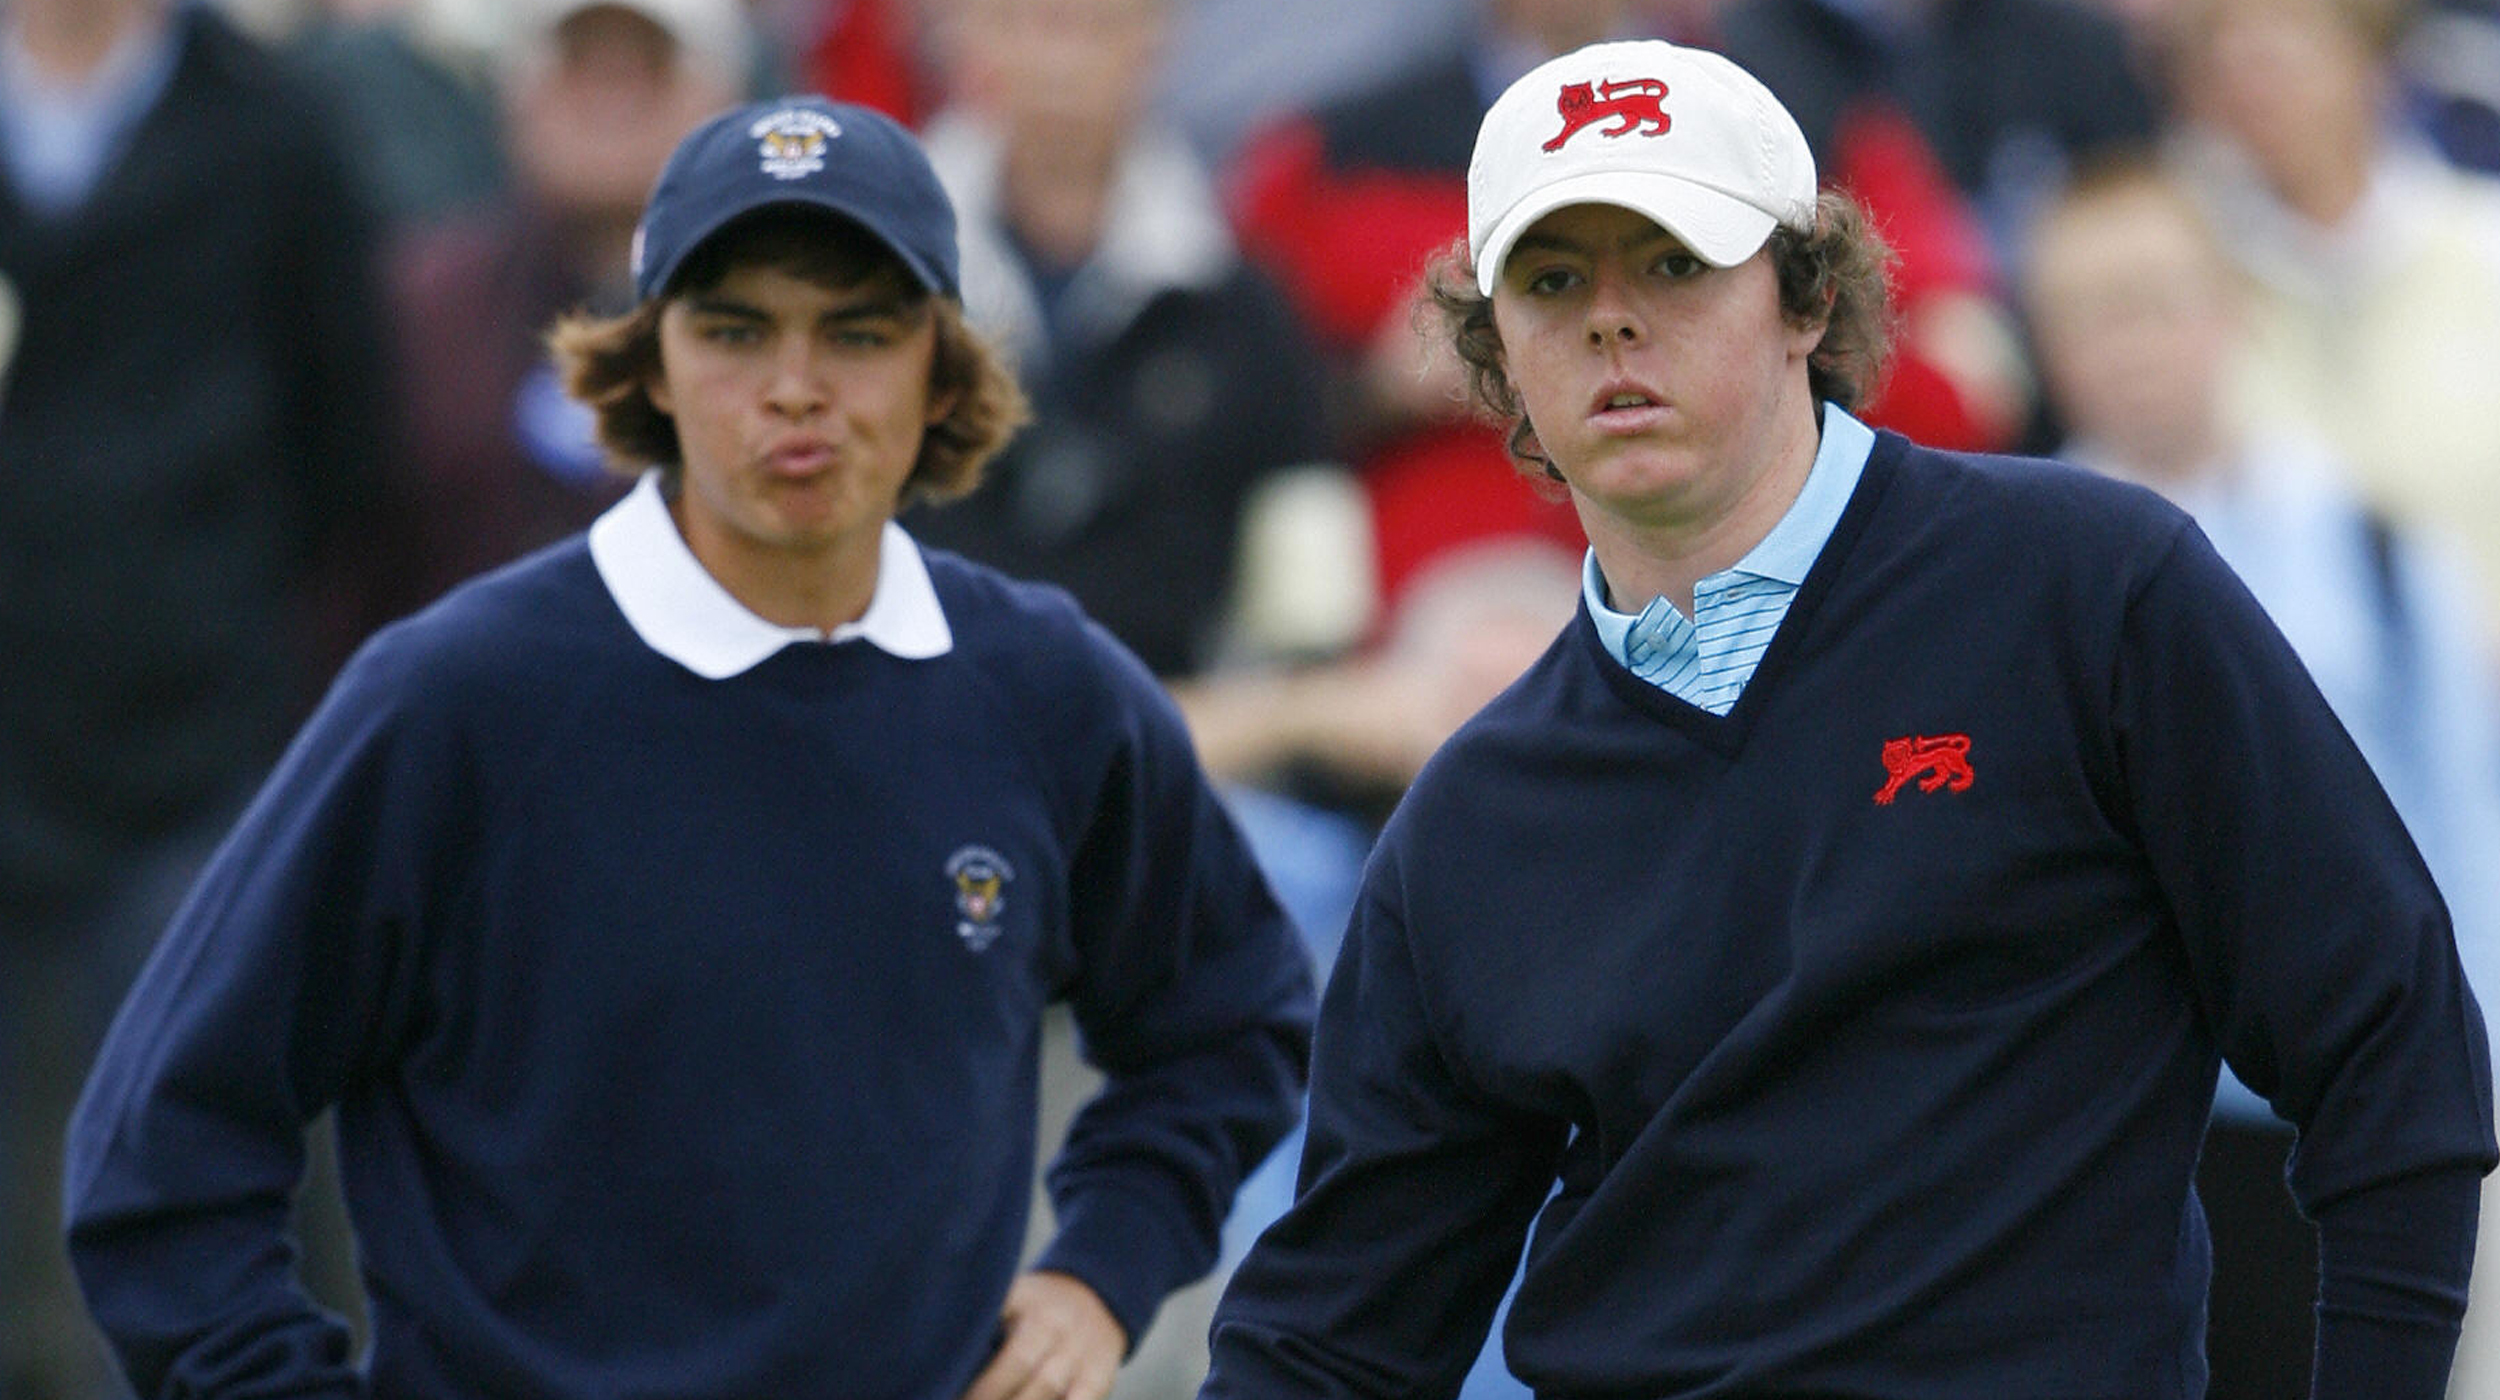 Rickie Fowler and Rory McIlroy